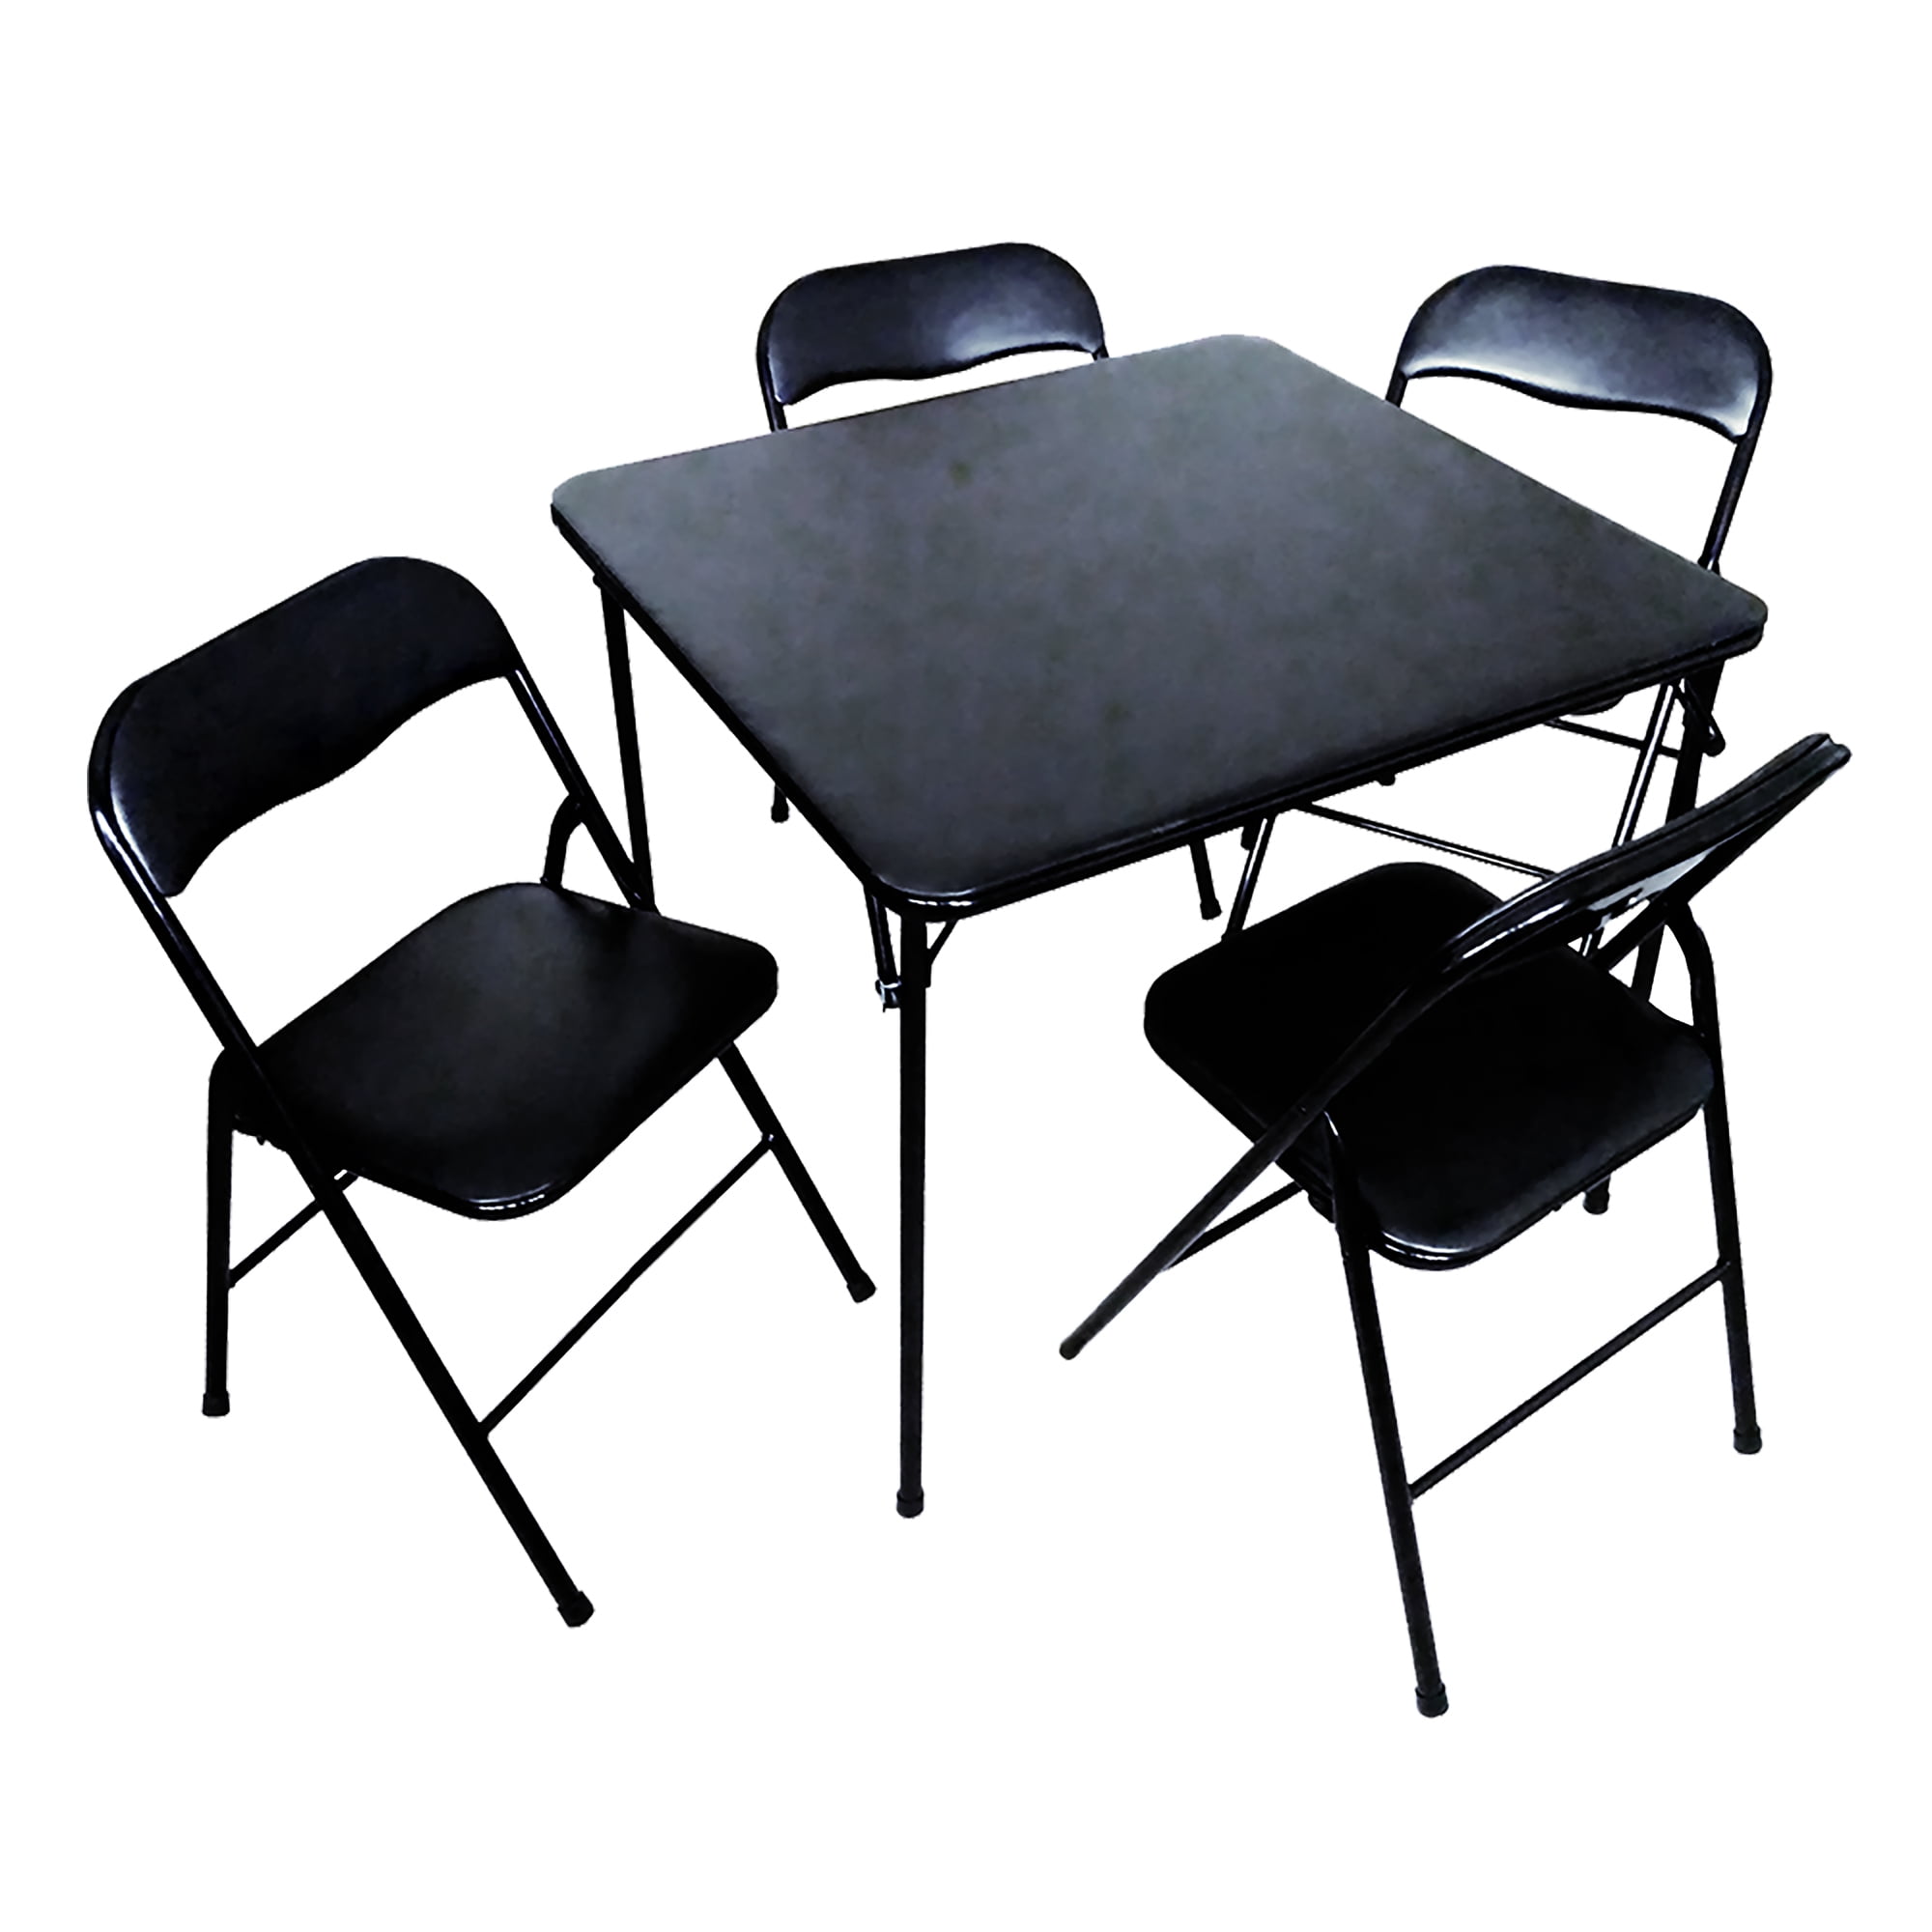 Steel Folding 5 Piece Table And Chairs Set Kitchen Dining Furniture Card Tables 